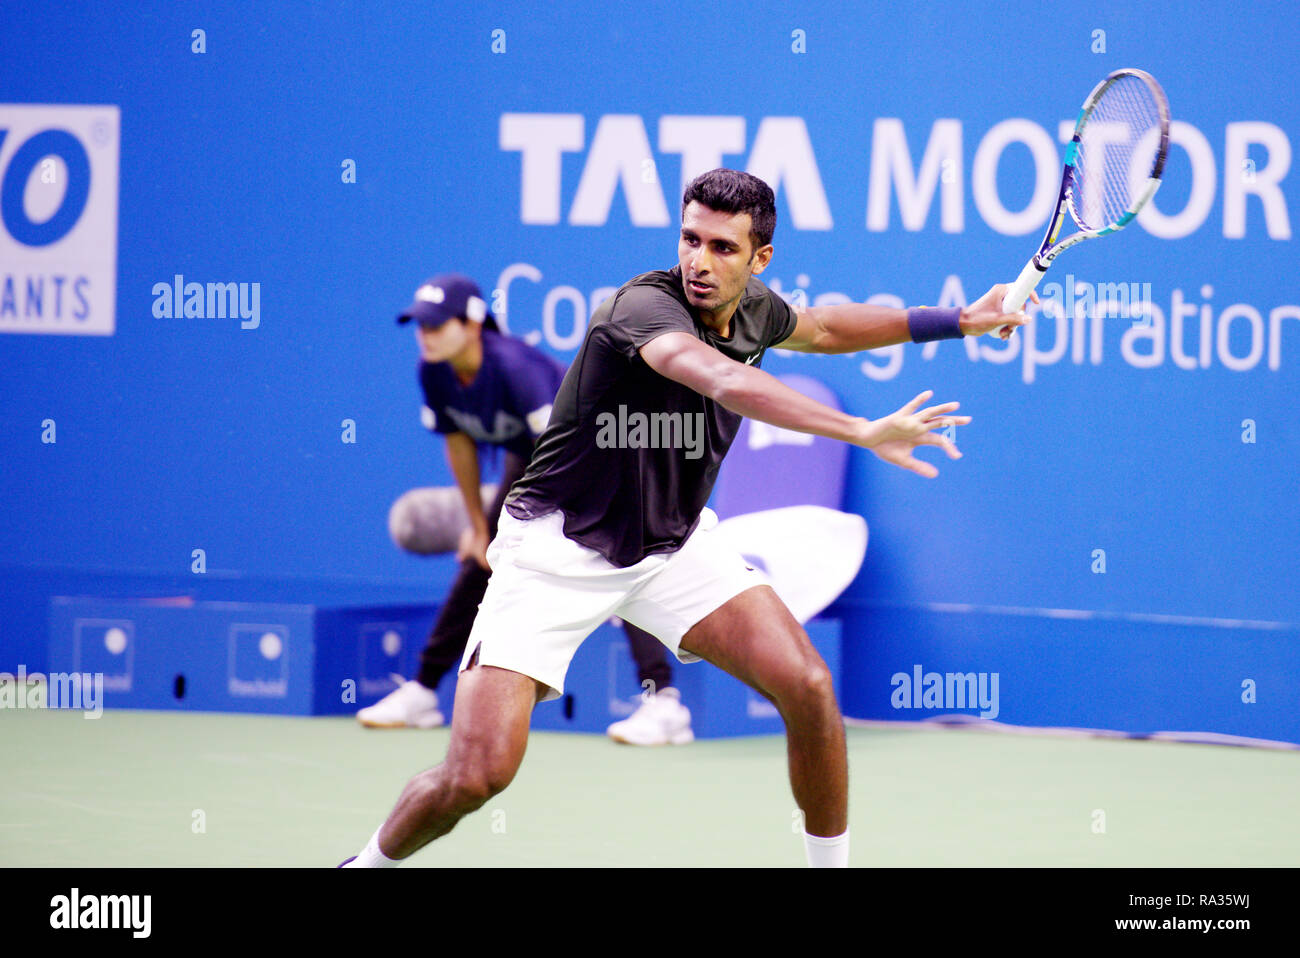 Pune, India. 31st December 2018. Prajnesh Gunneswaran of India in action in the first round of singles competition at Tata Open Maharashtra ATP Tennis tournament in Pune, India. Credit: Karunesh Johri/Alamy Live News Stock Photo